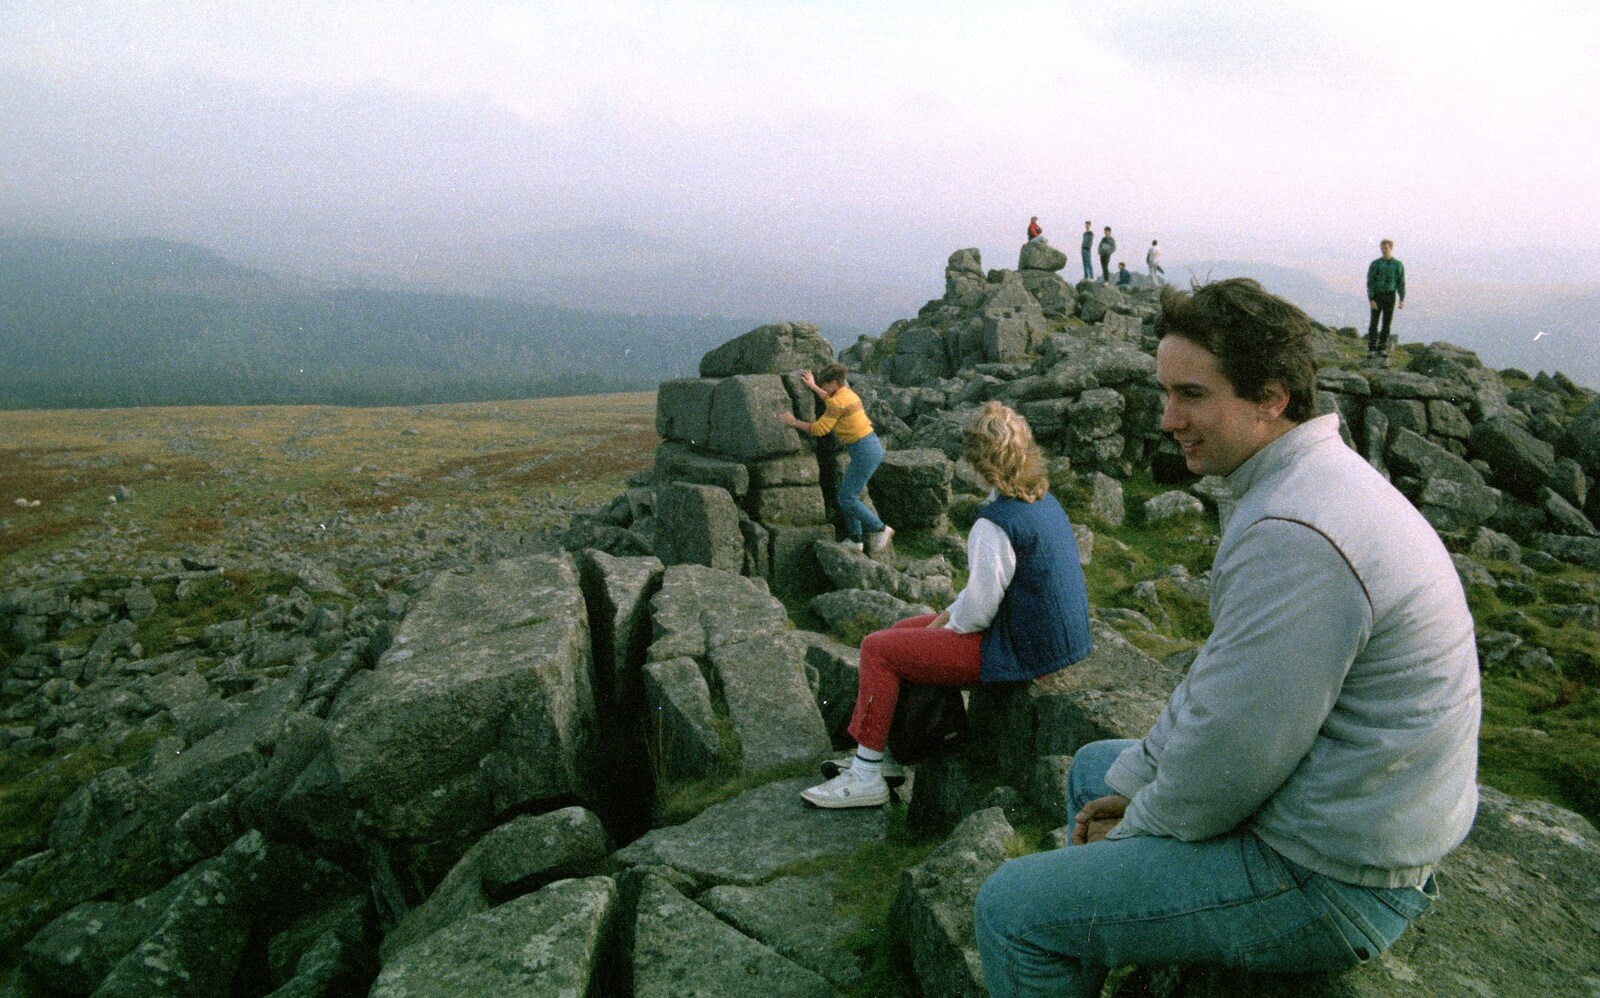 Riki sits on a tor and admires the view from A Trip to Trotsky's Mount, Dartmoor, Devon - 20th March 1987